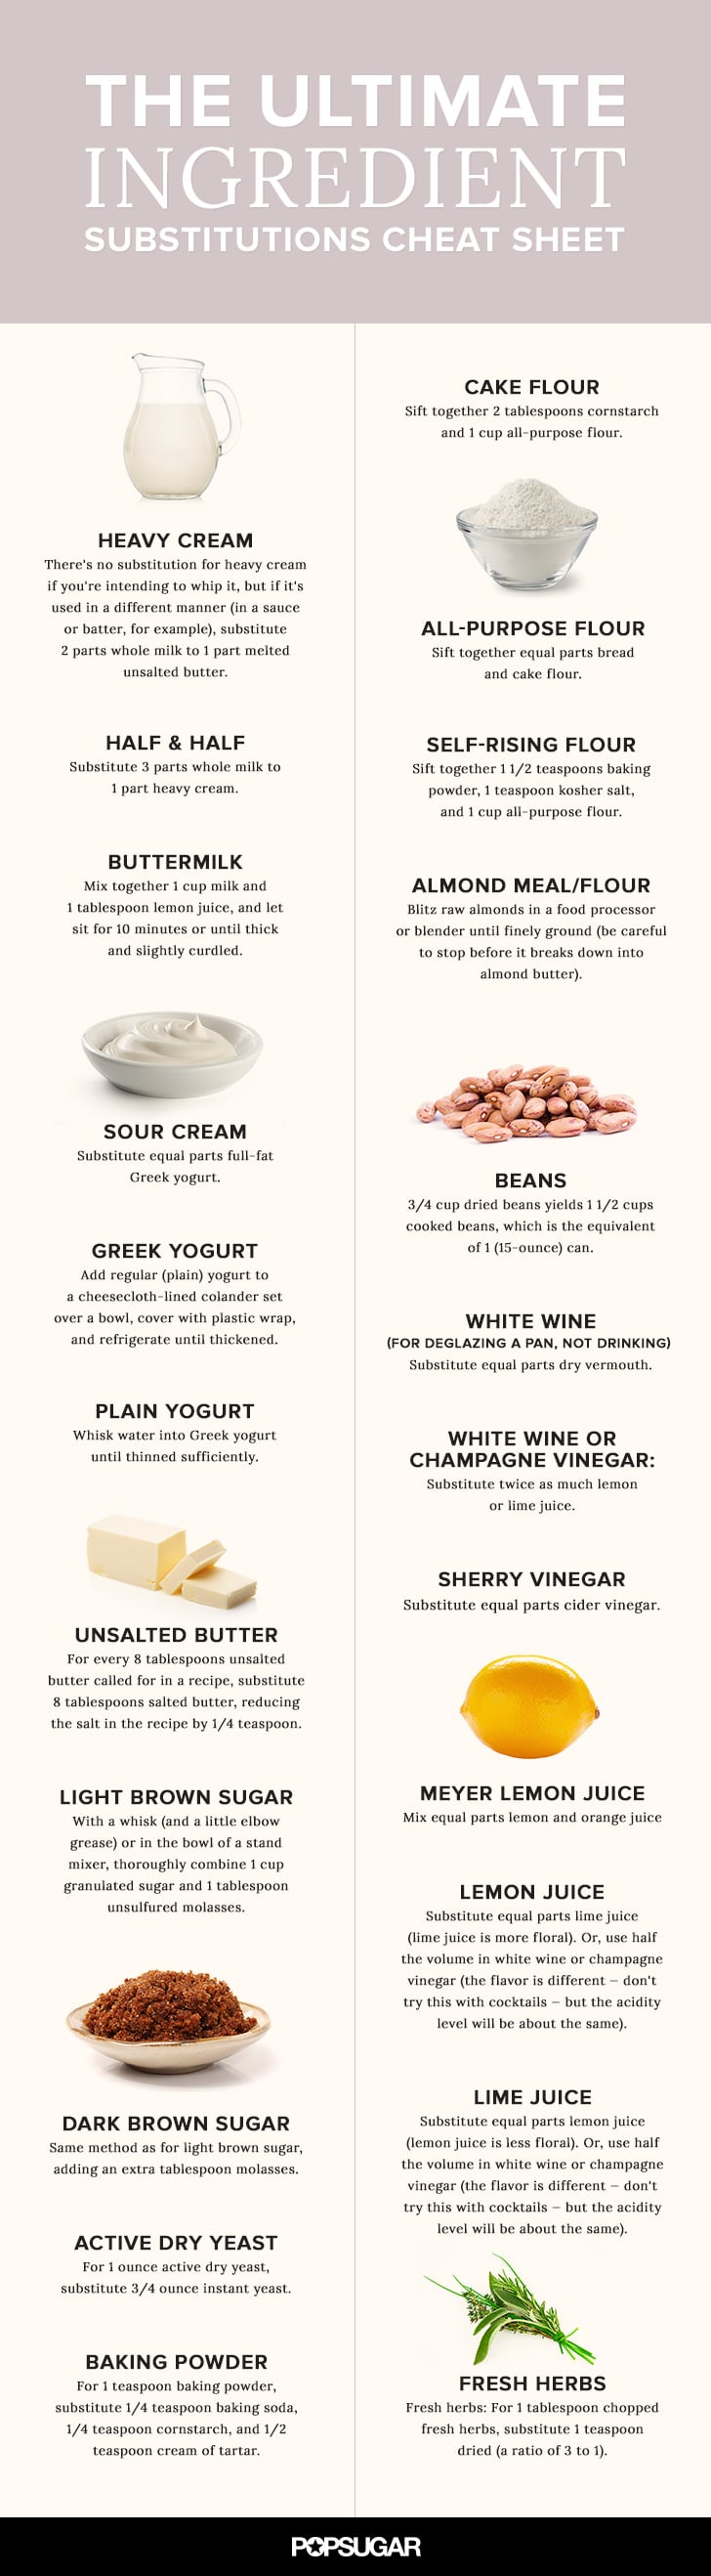 Get the guide: common ingredient substitutions